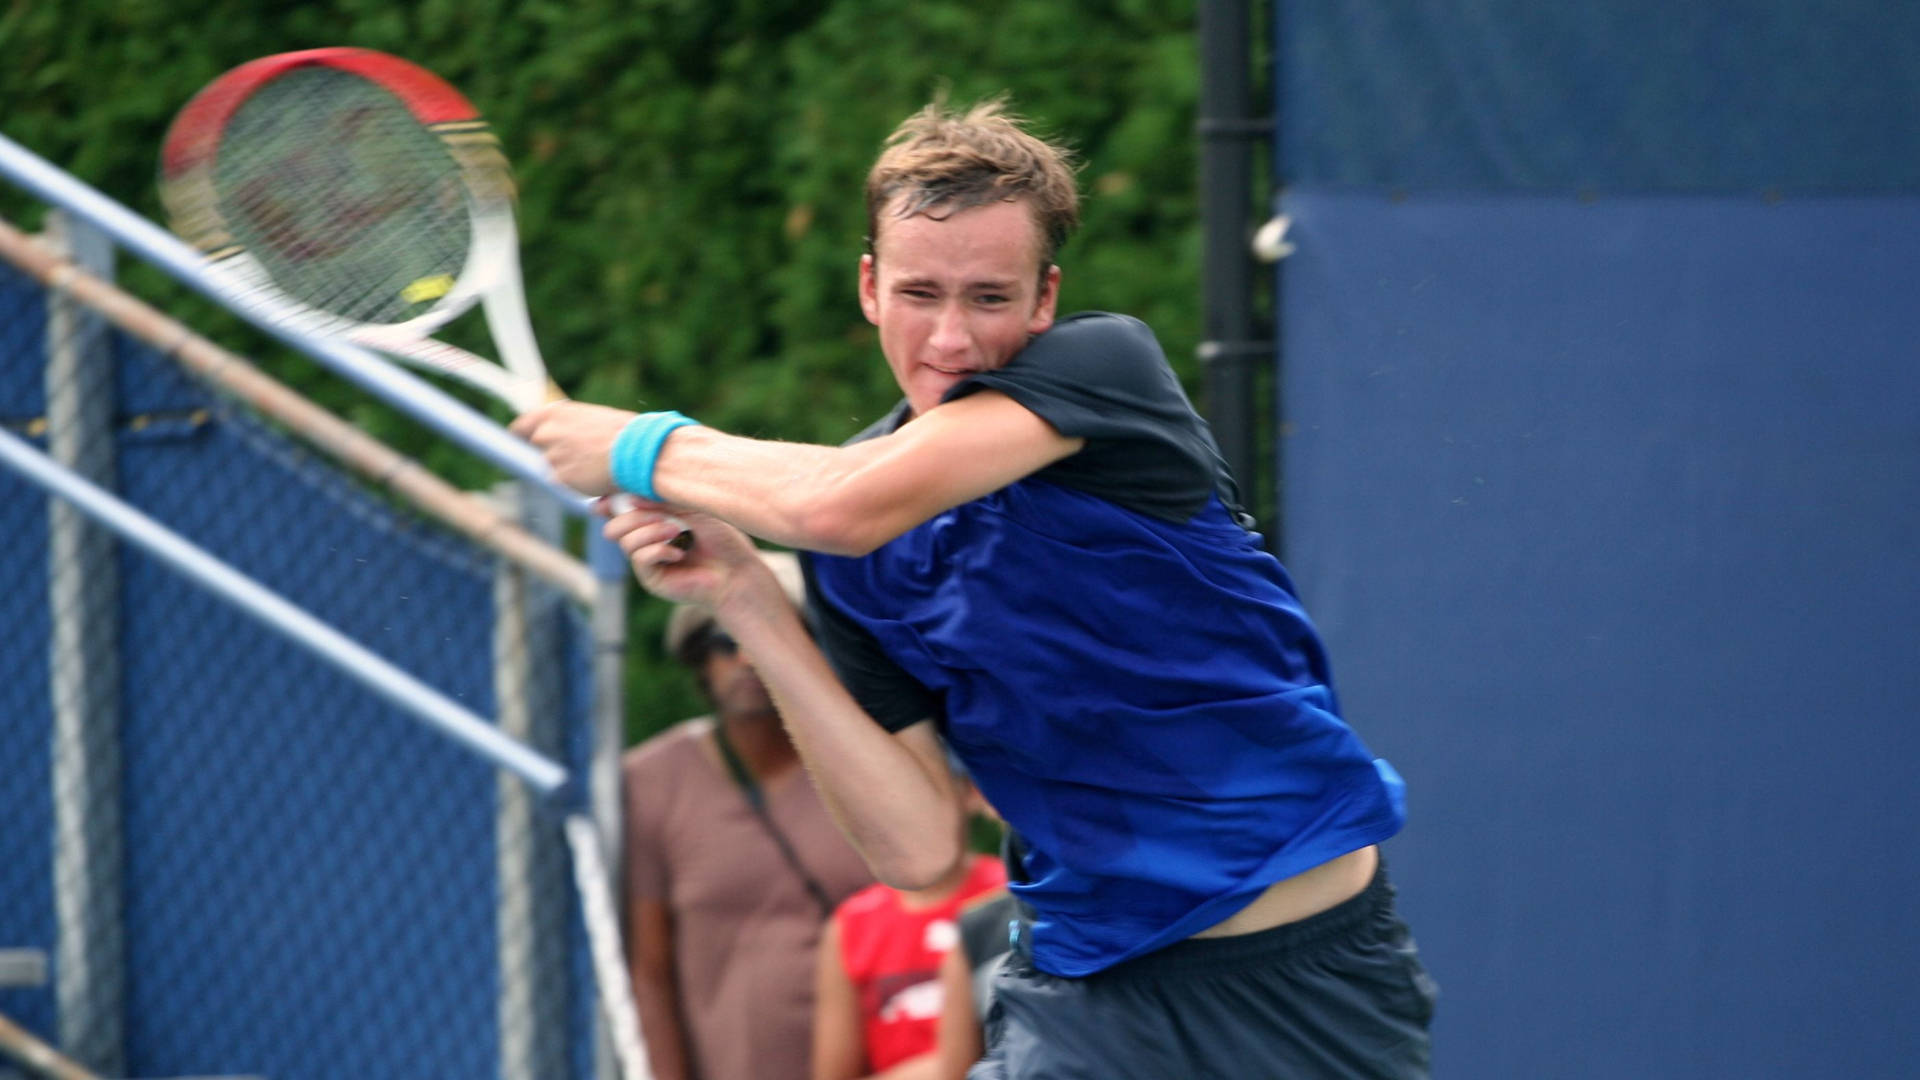 Daniil Medvedev Demonstrates Perfect Backhand During A Tennis Match Background